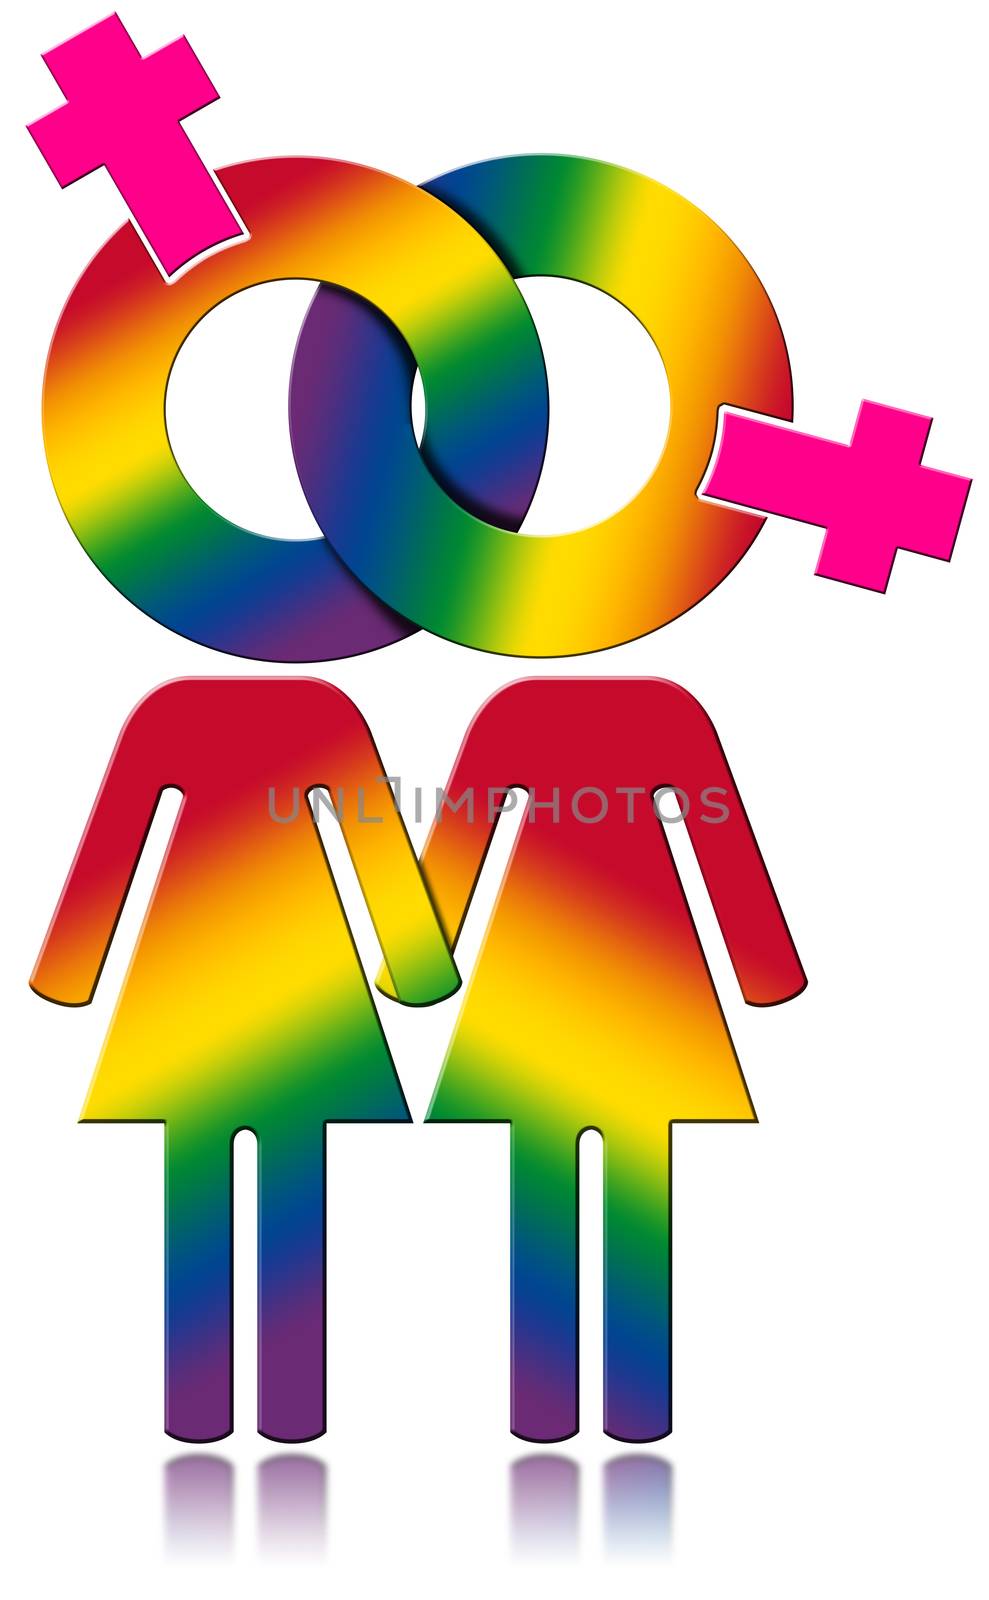 Lesbians Relationship - Rainbow Colored Symbol by catalby